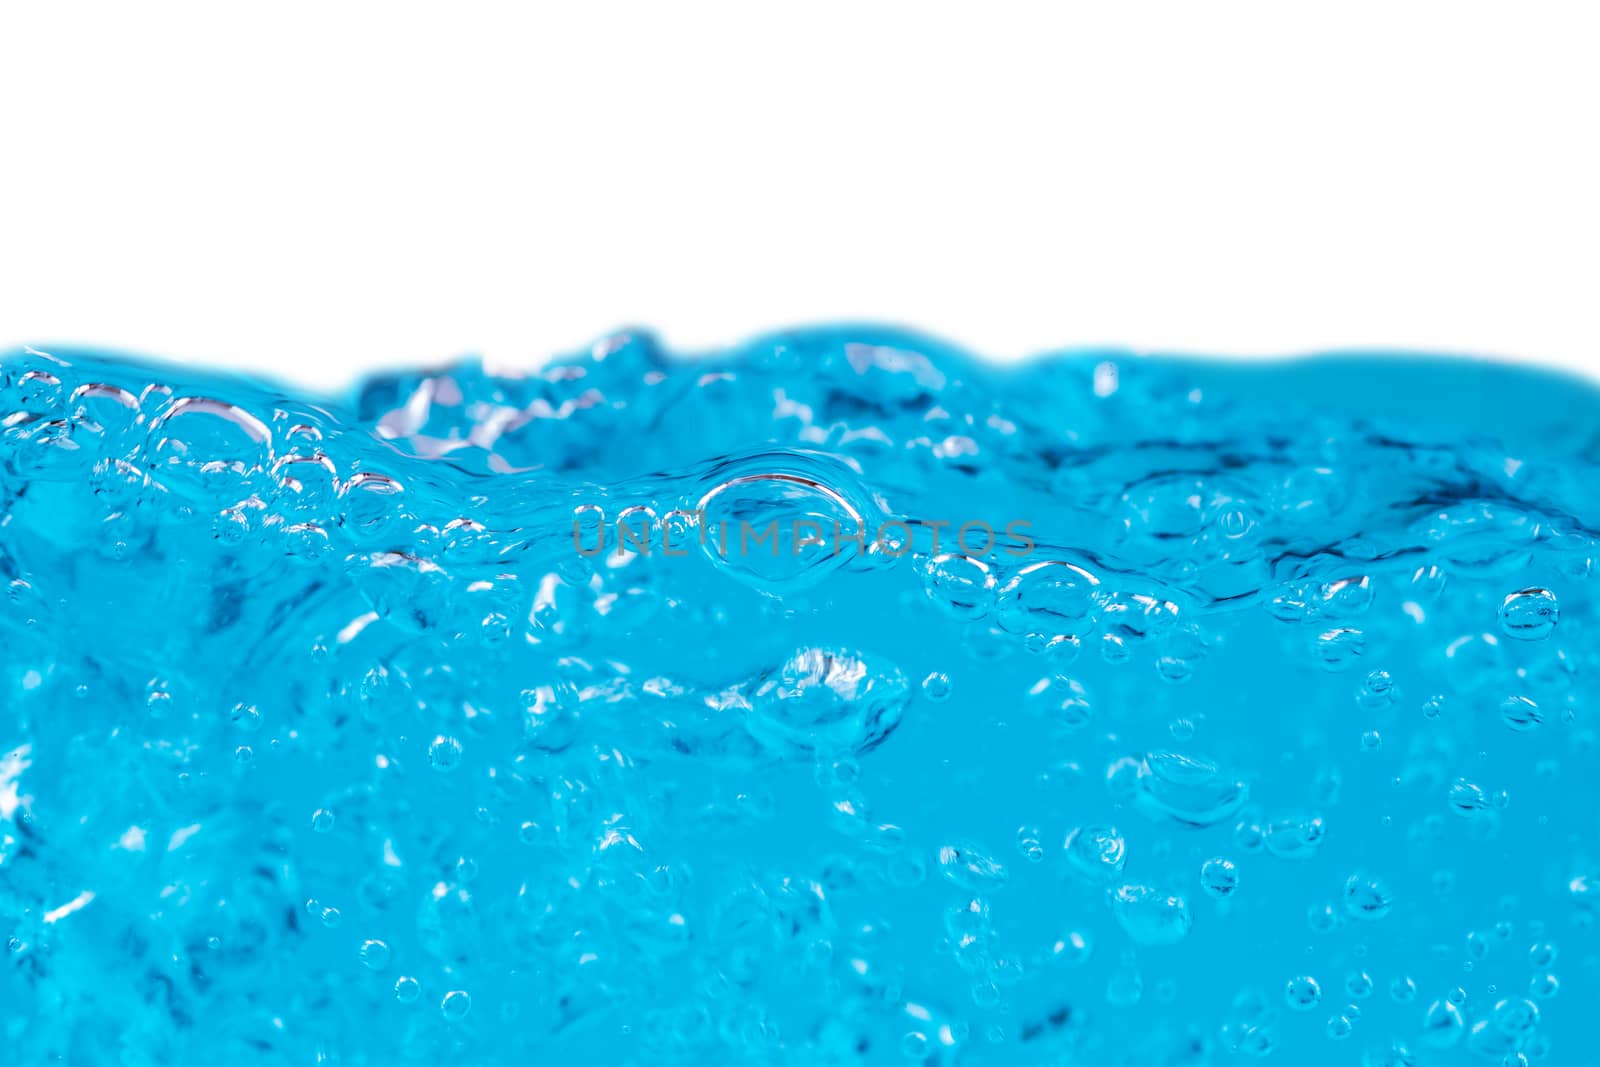 Abstract blue water textures for background by Buttus_casso